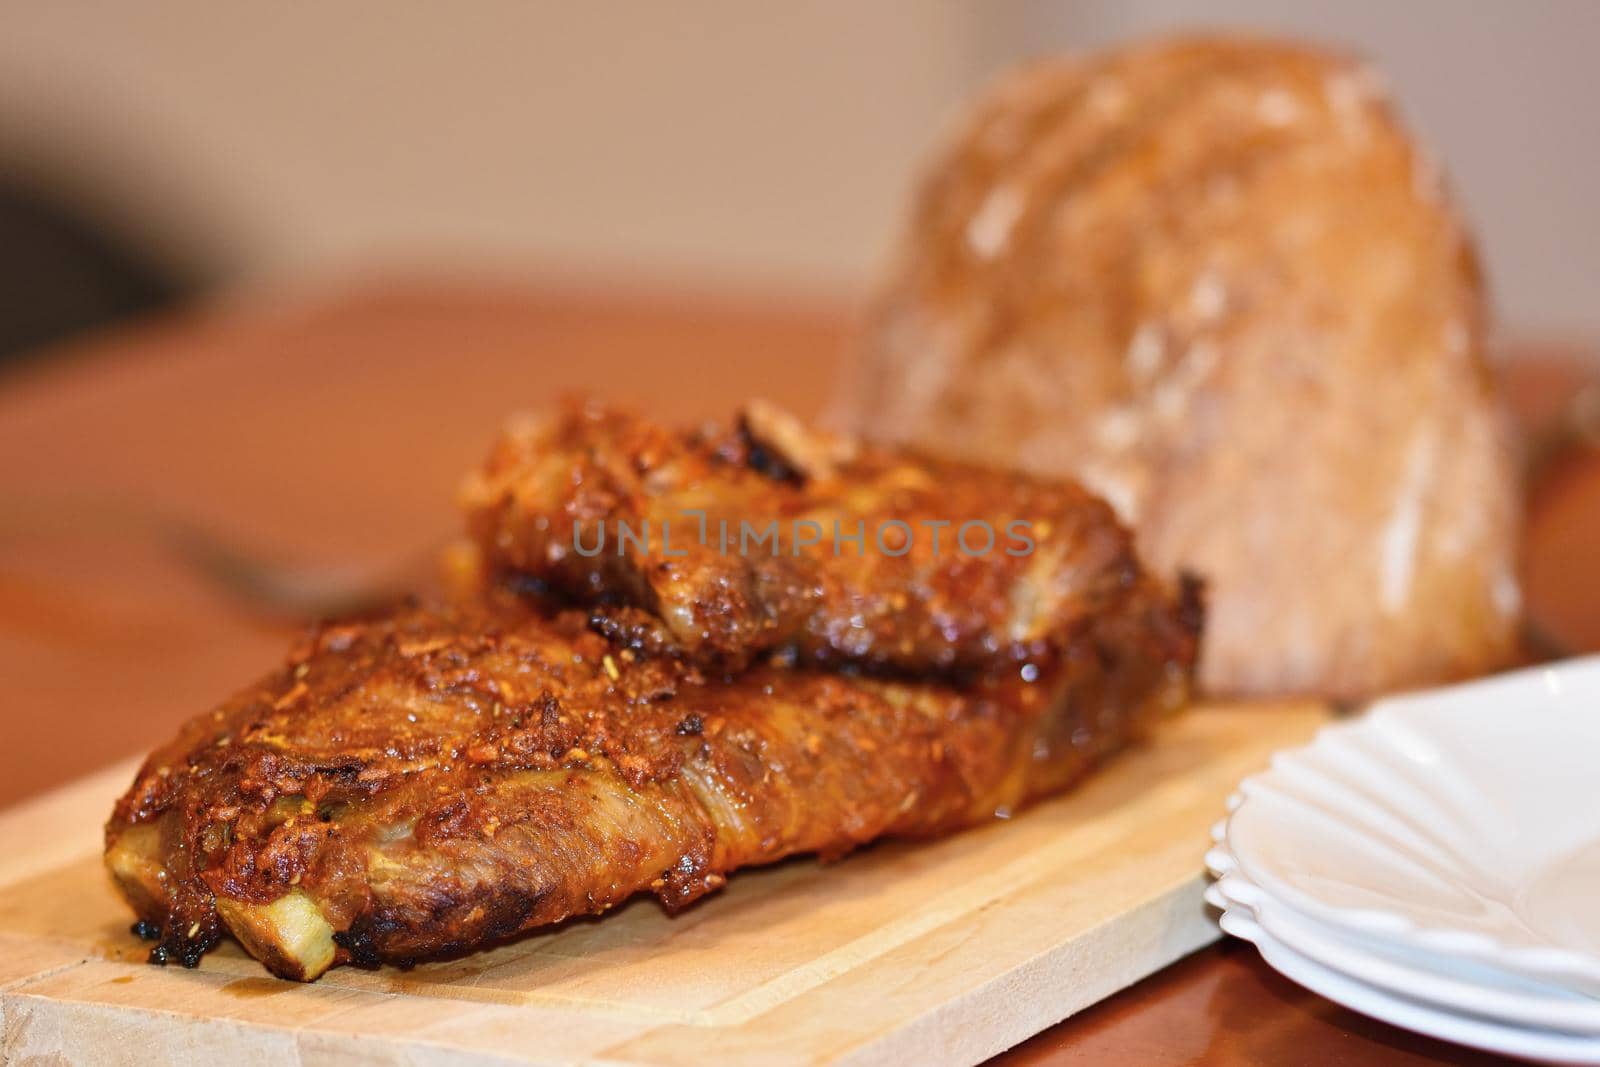 Roasted pork ribs. On wooden background and bread. by Montypeter